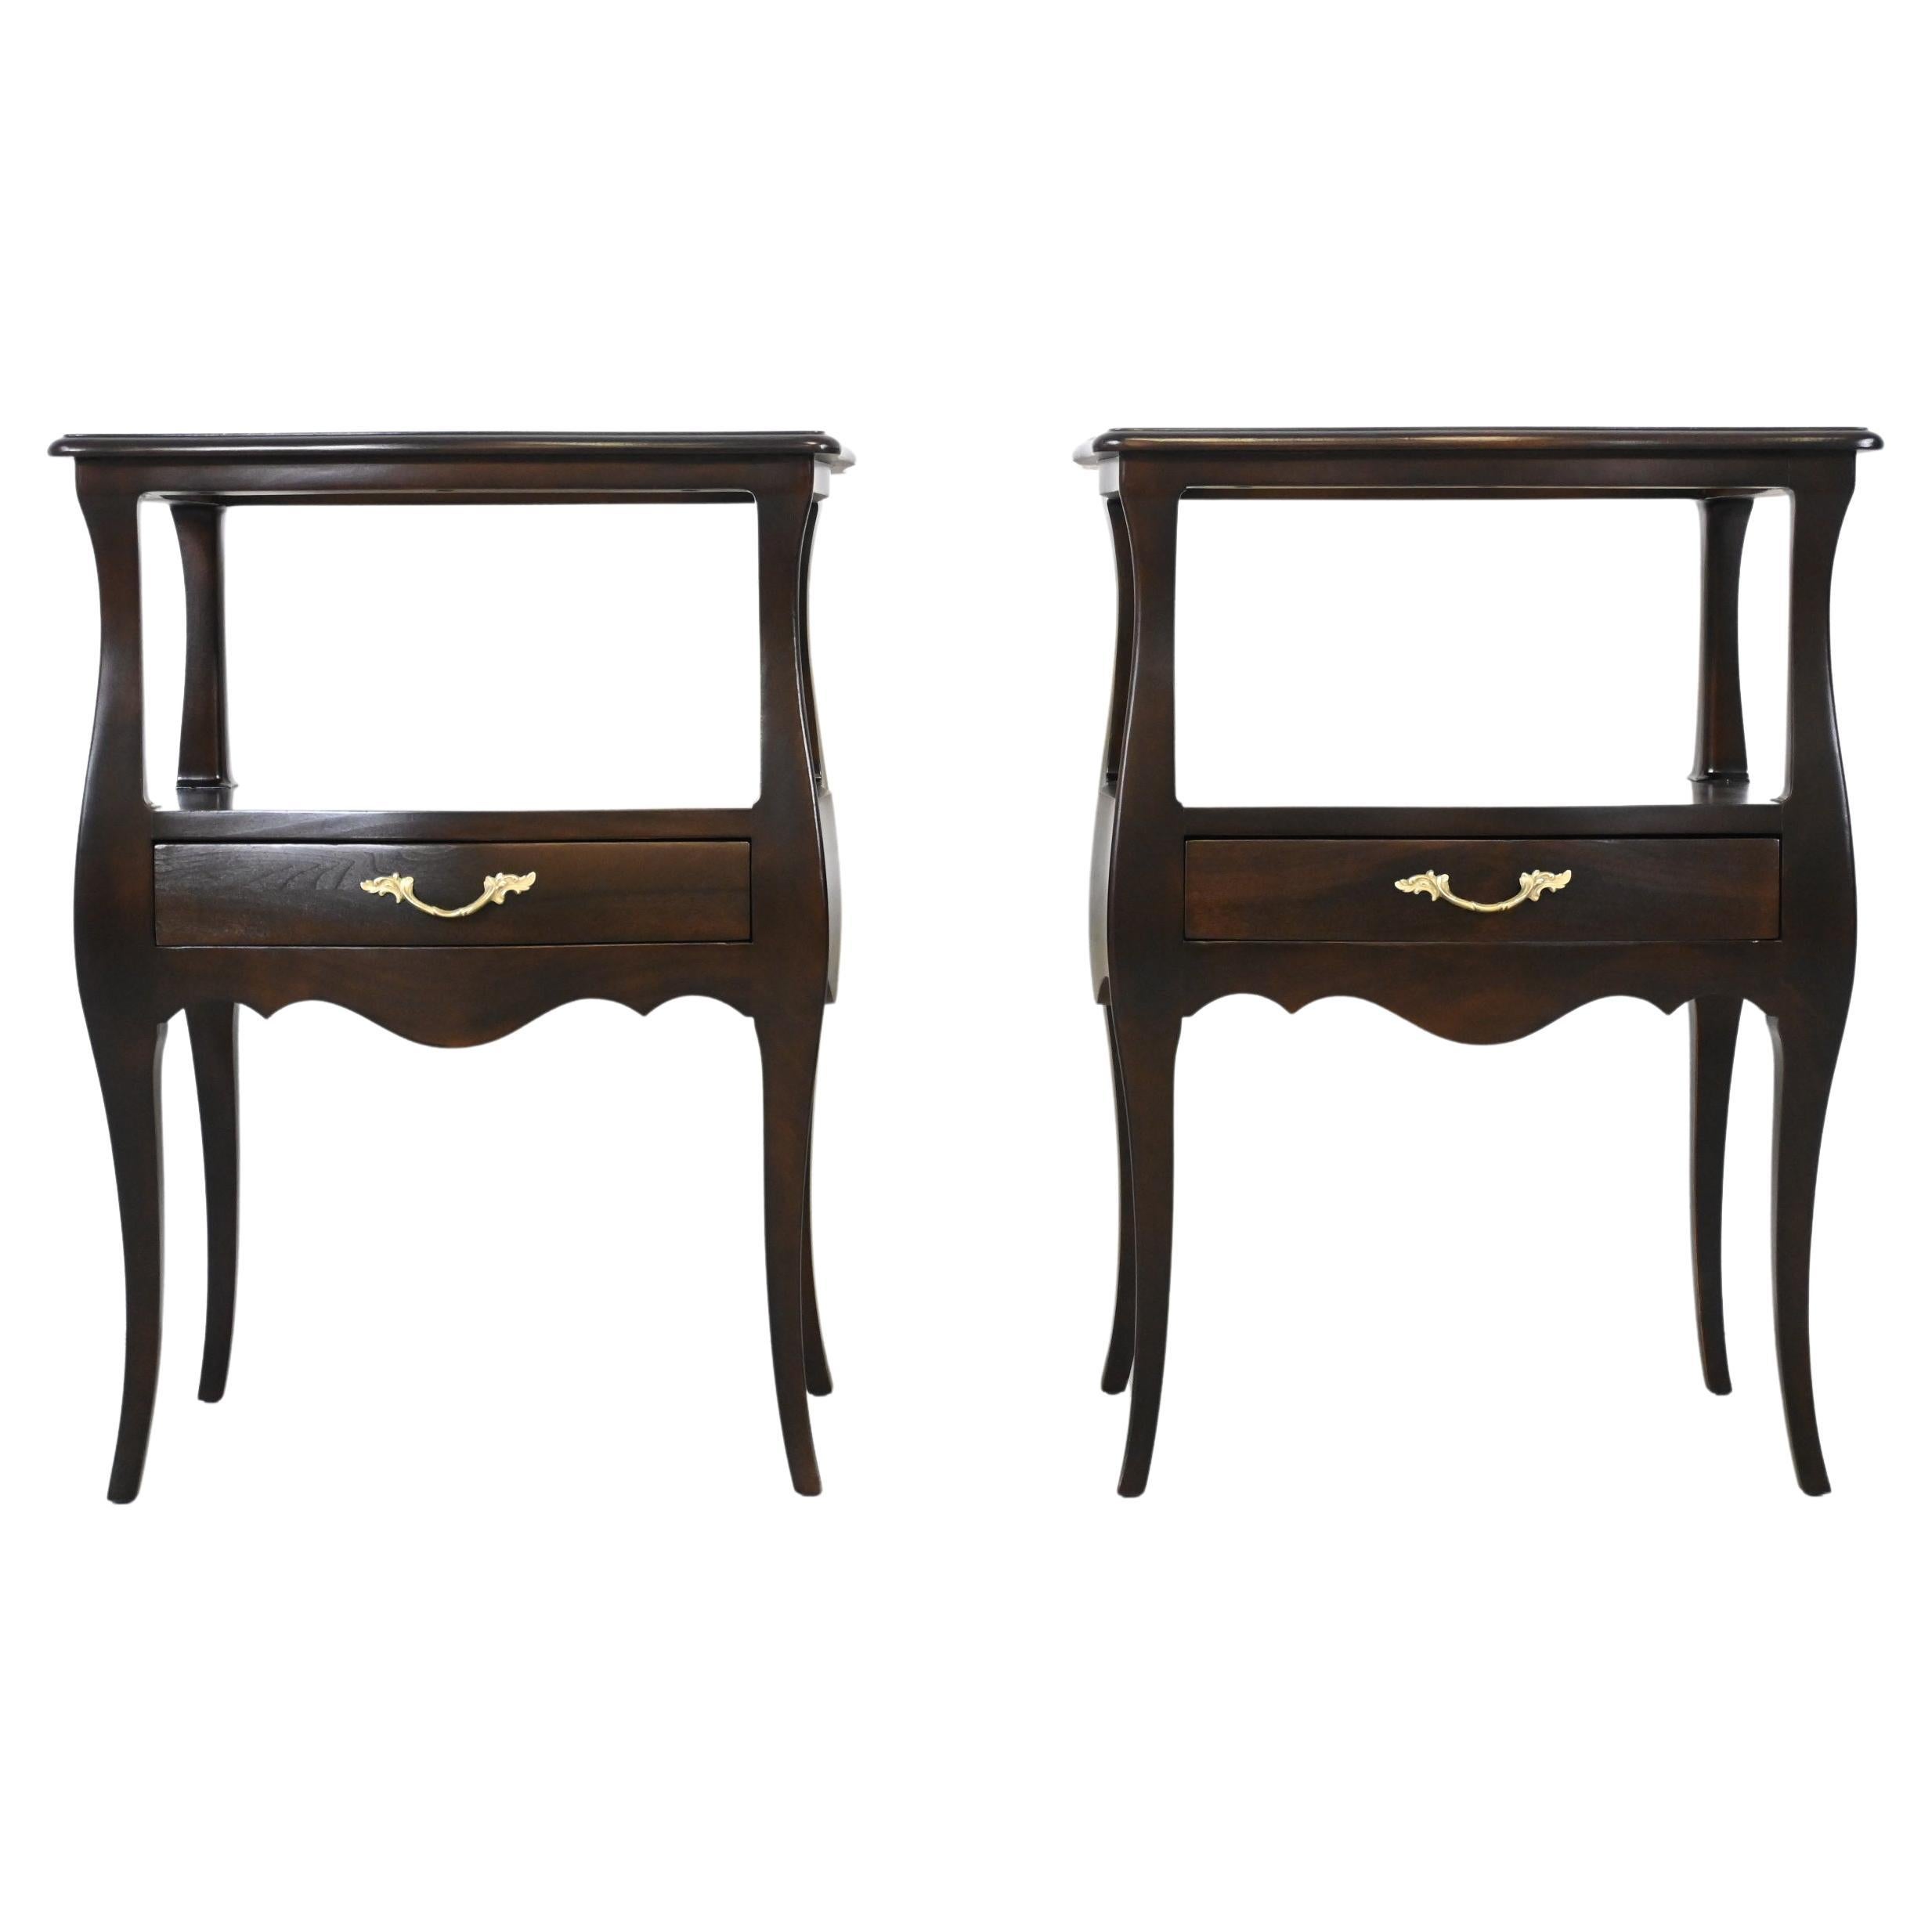 John Widdicomb French Provincial Nightstands - Set of 2 For Sale